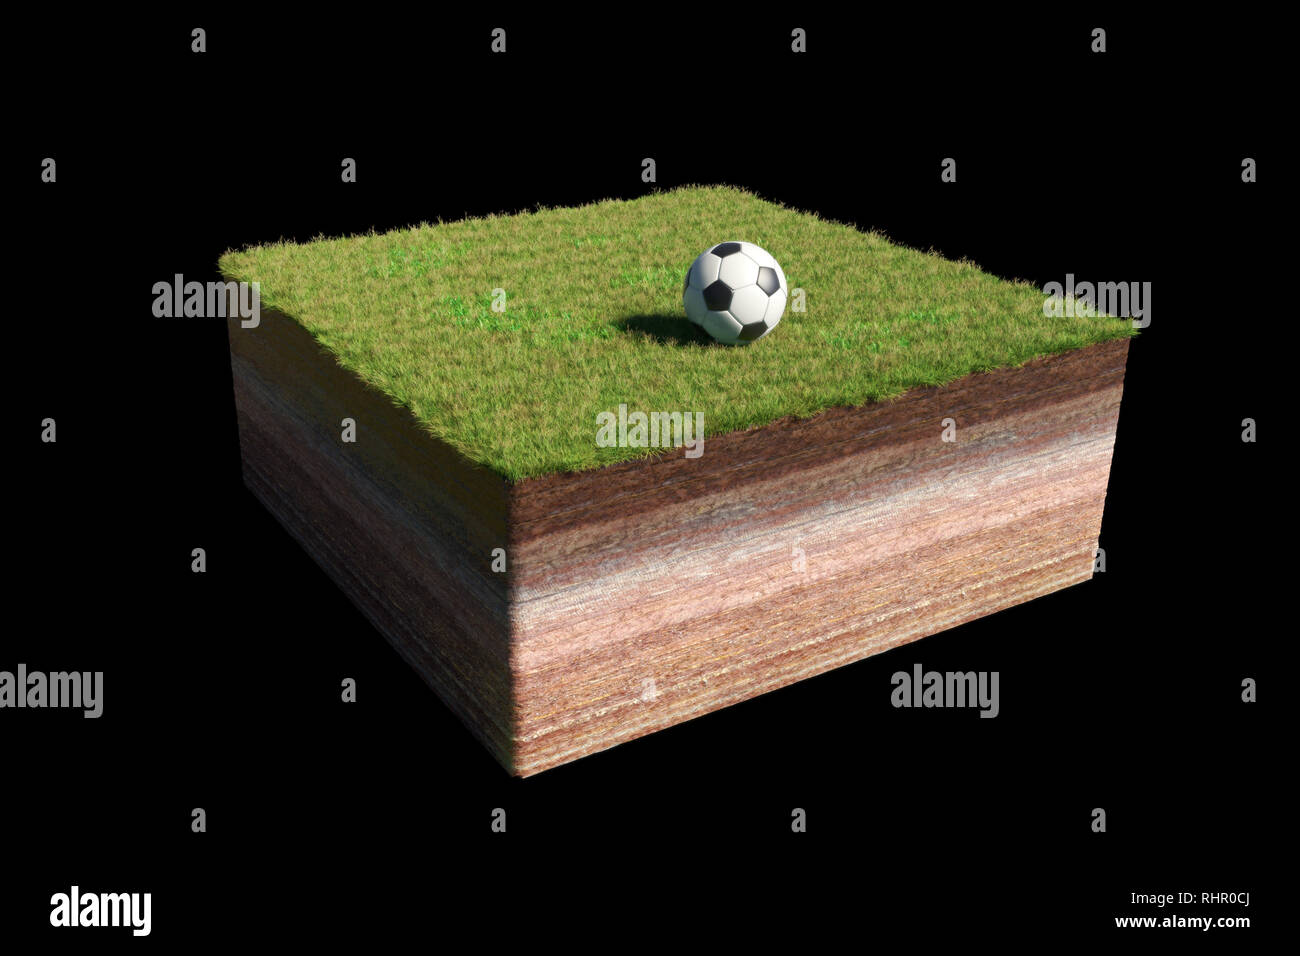 model of a cross section of ground with soccer ball on soccer field (3d illustration, isolated with shadow on black background) Stock Photo